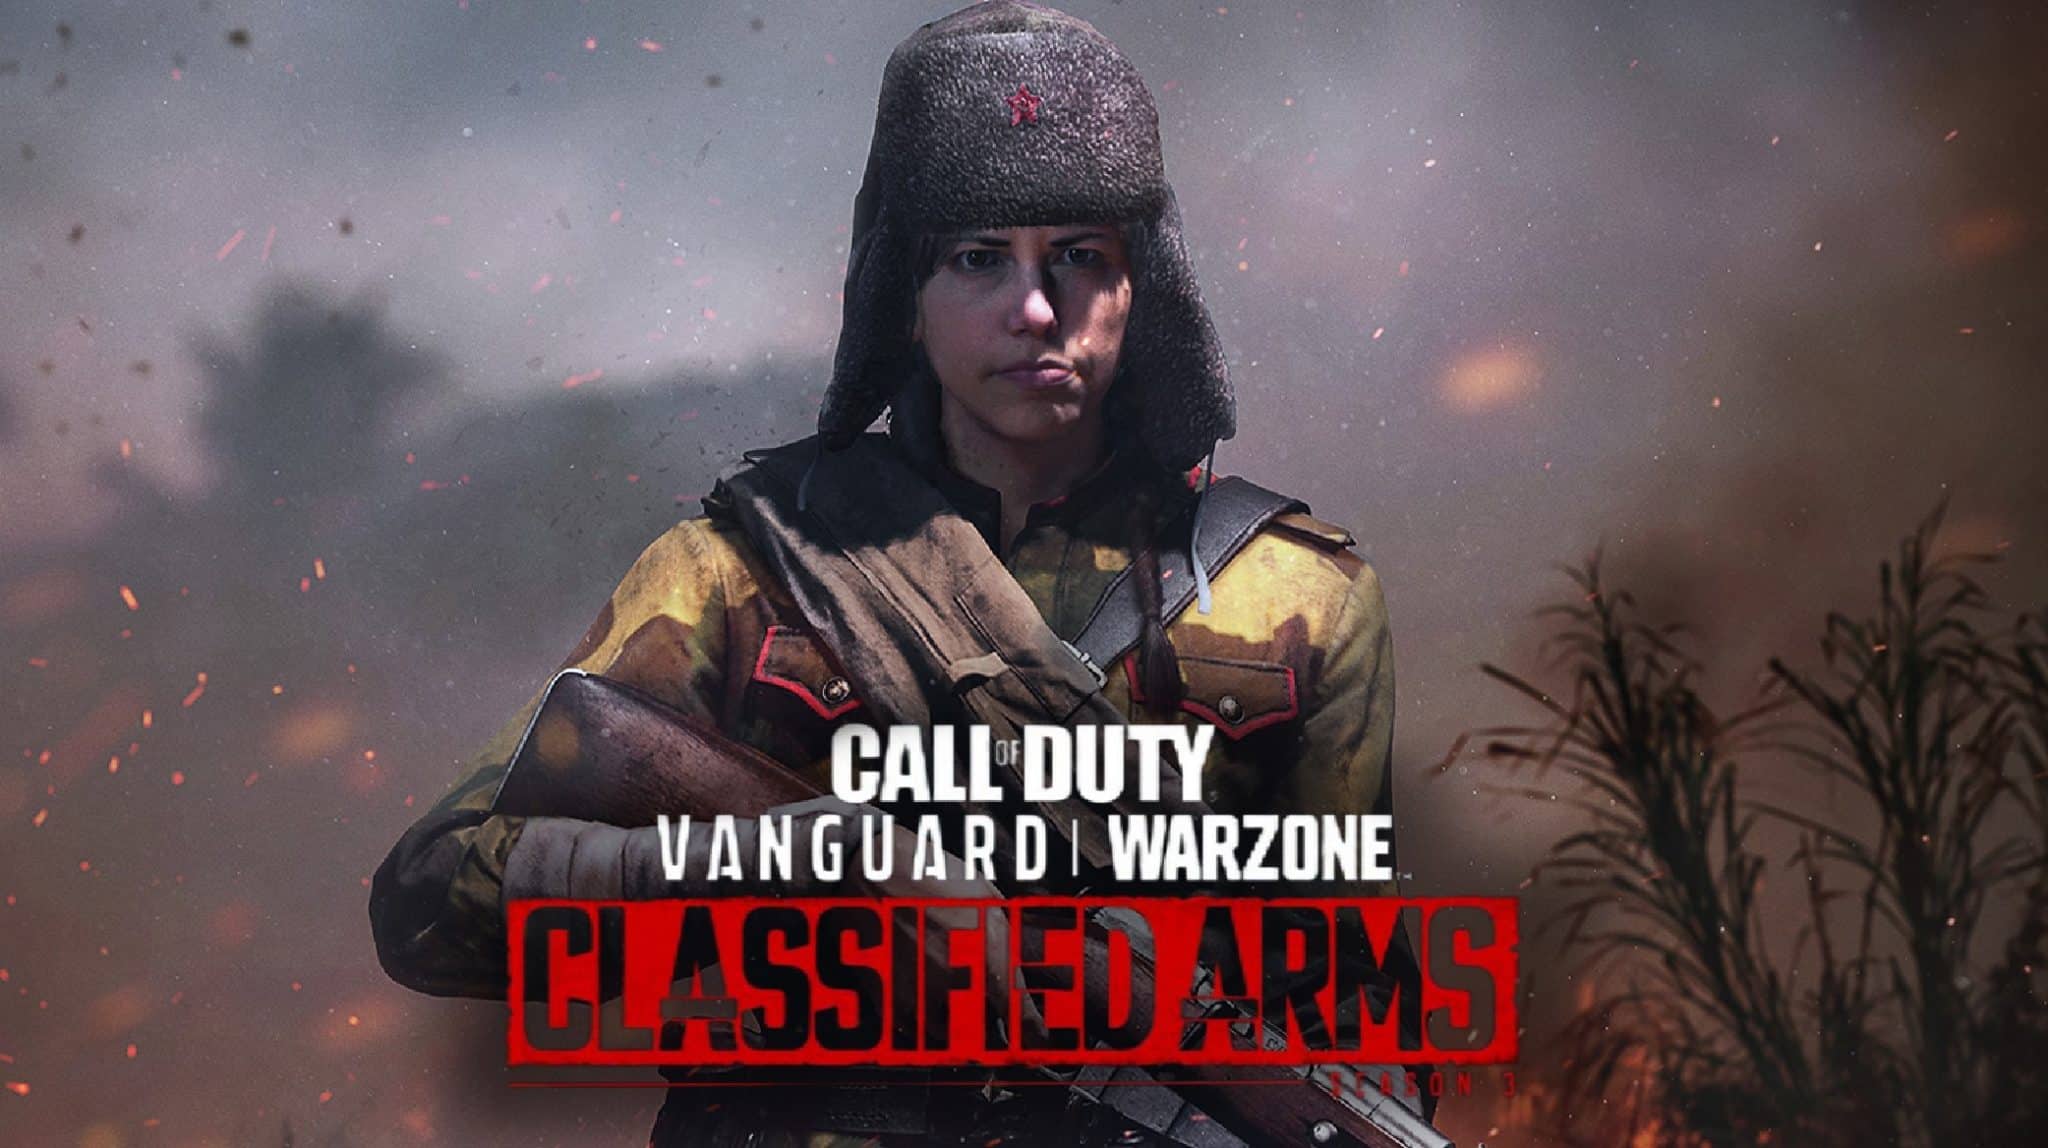 Warzone Pacific Season 3 Classified Arms cover art